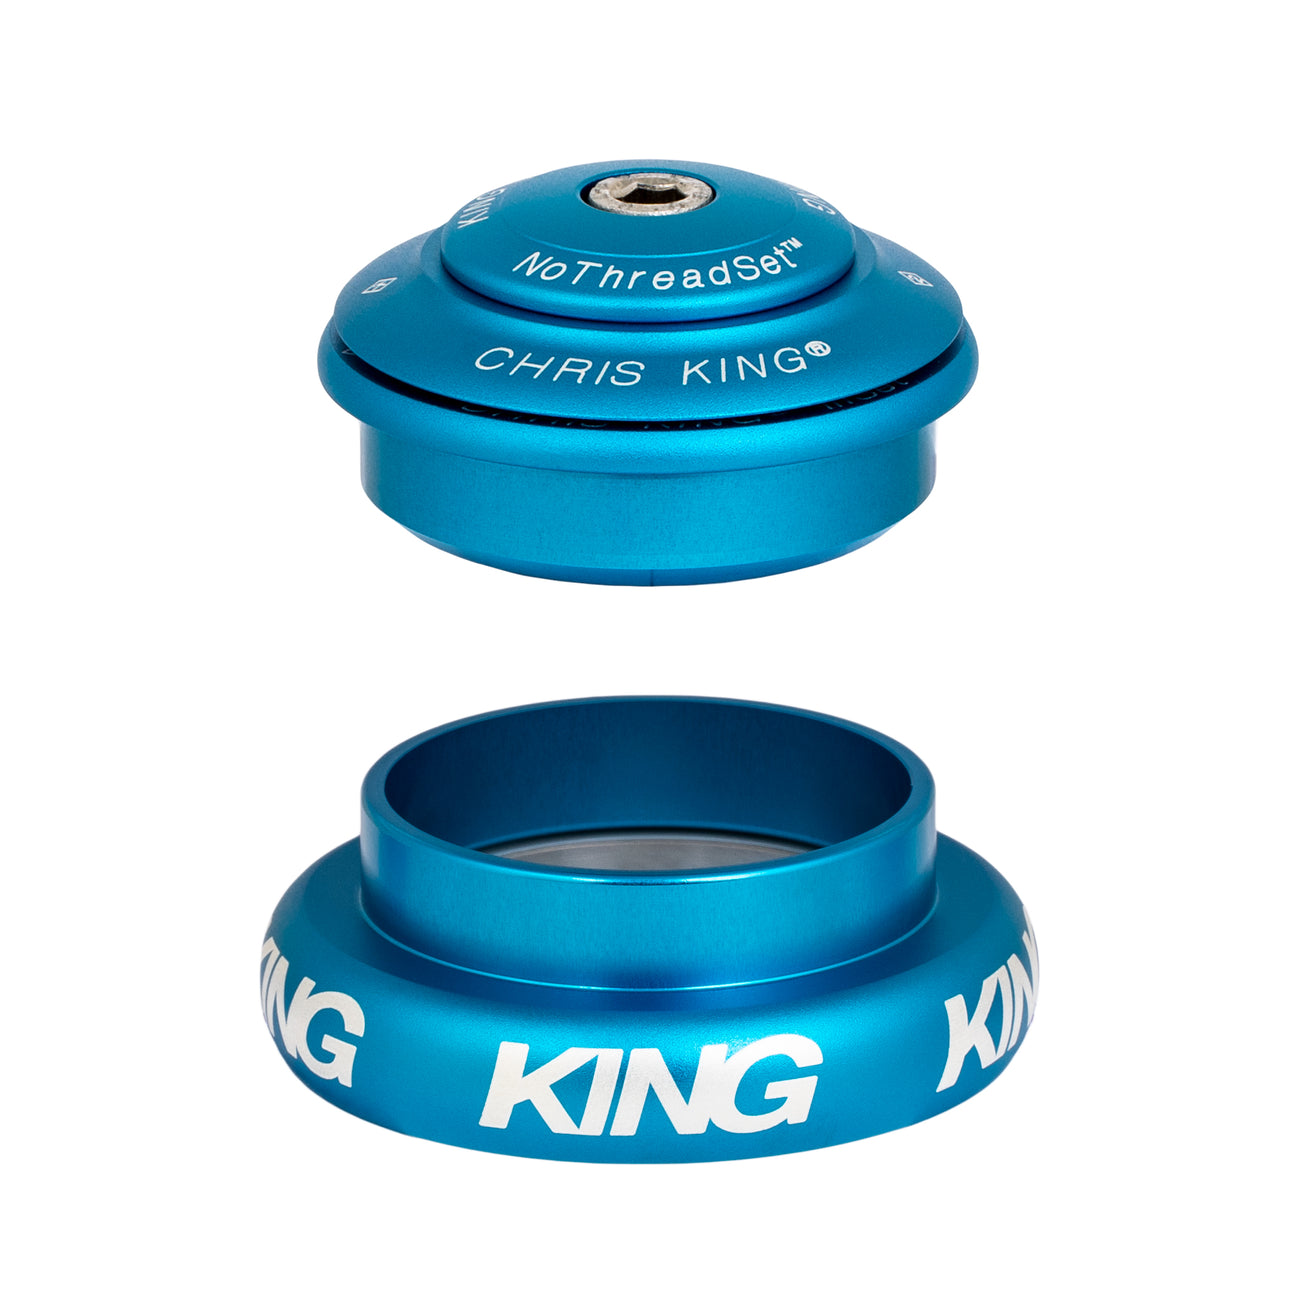 Chris King inset 7 headset in turquoise